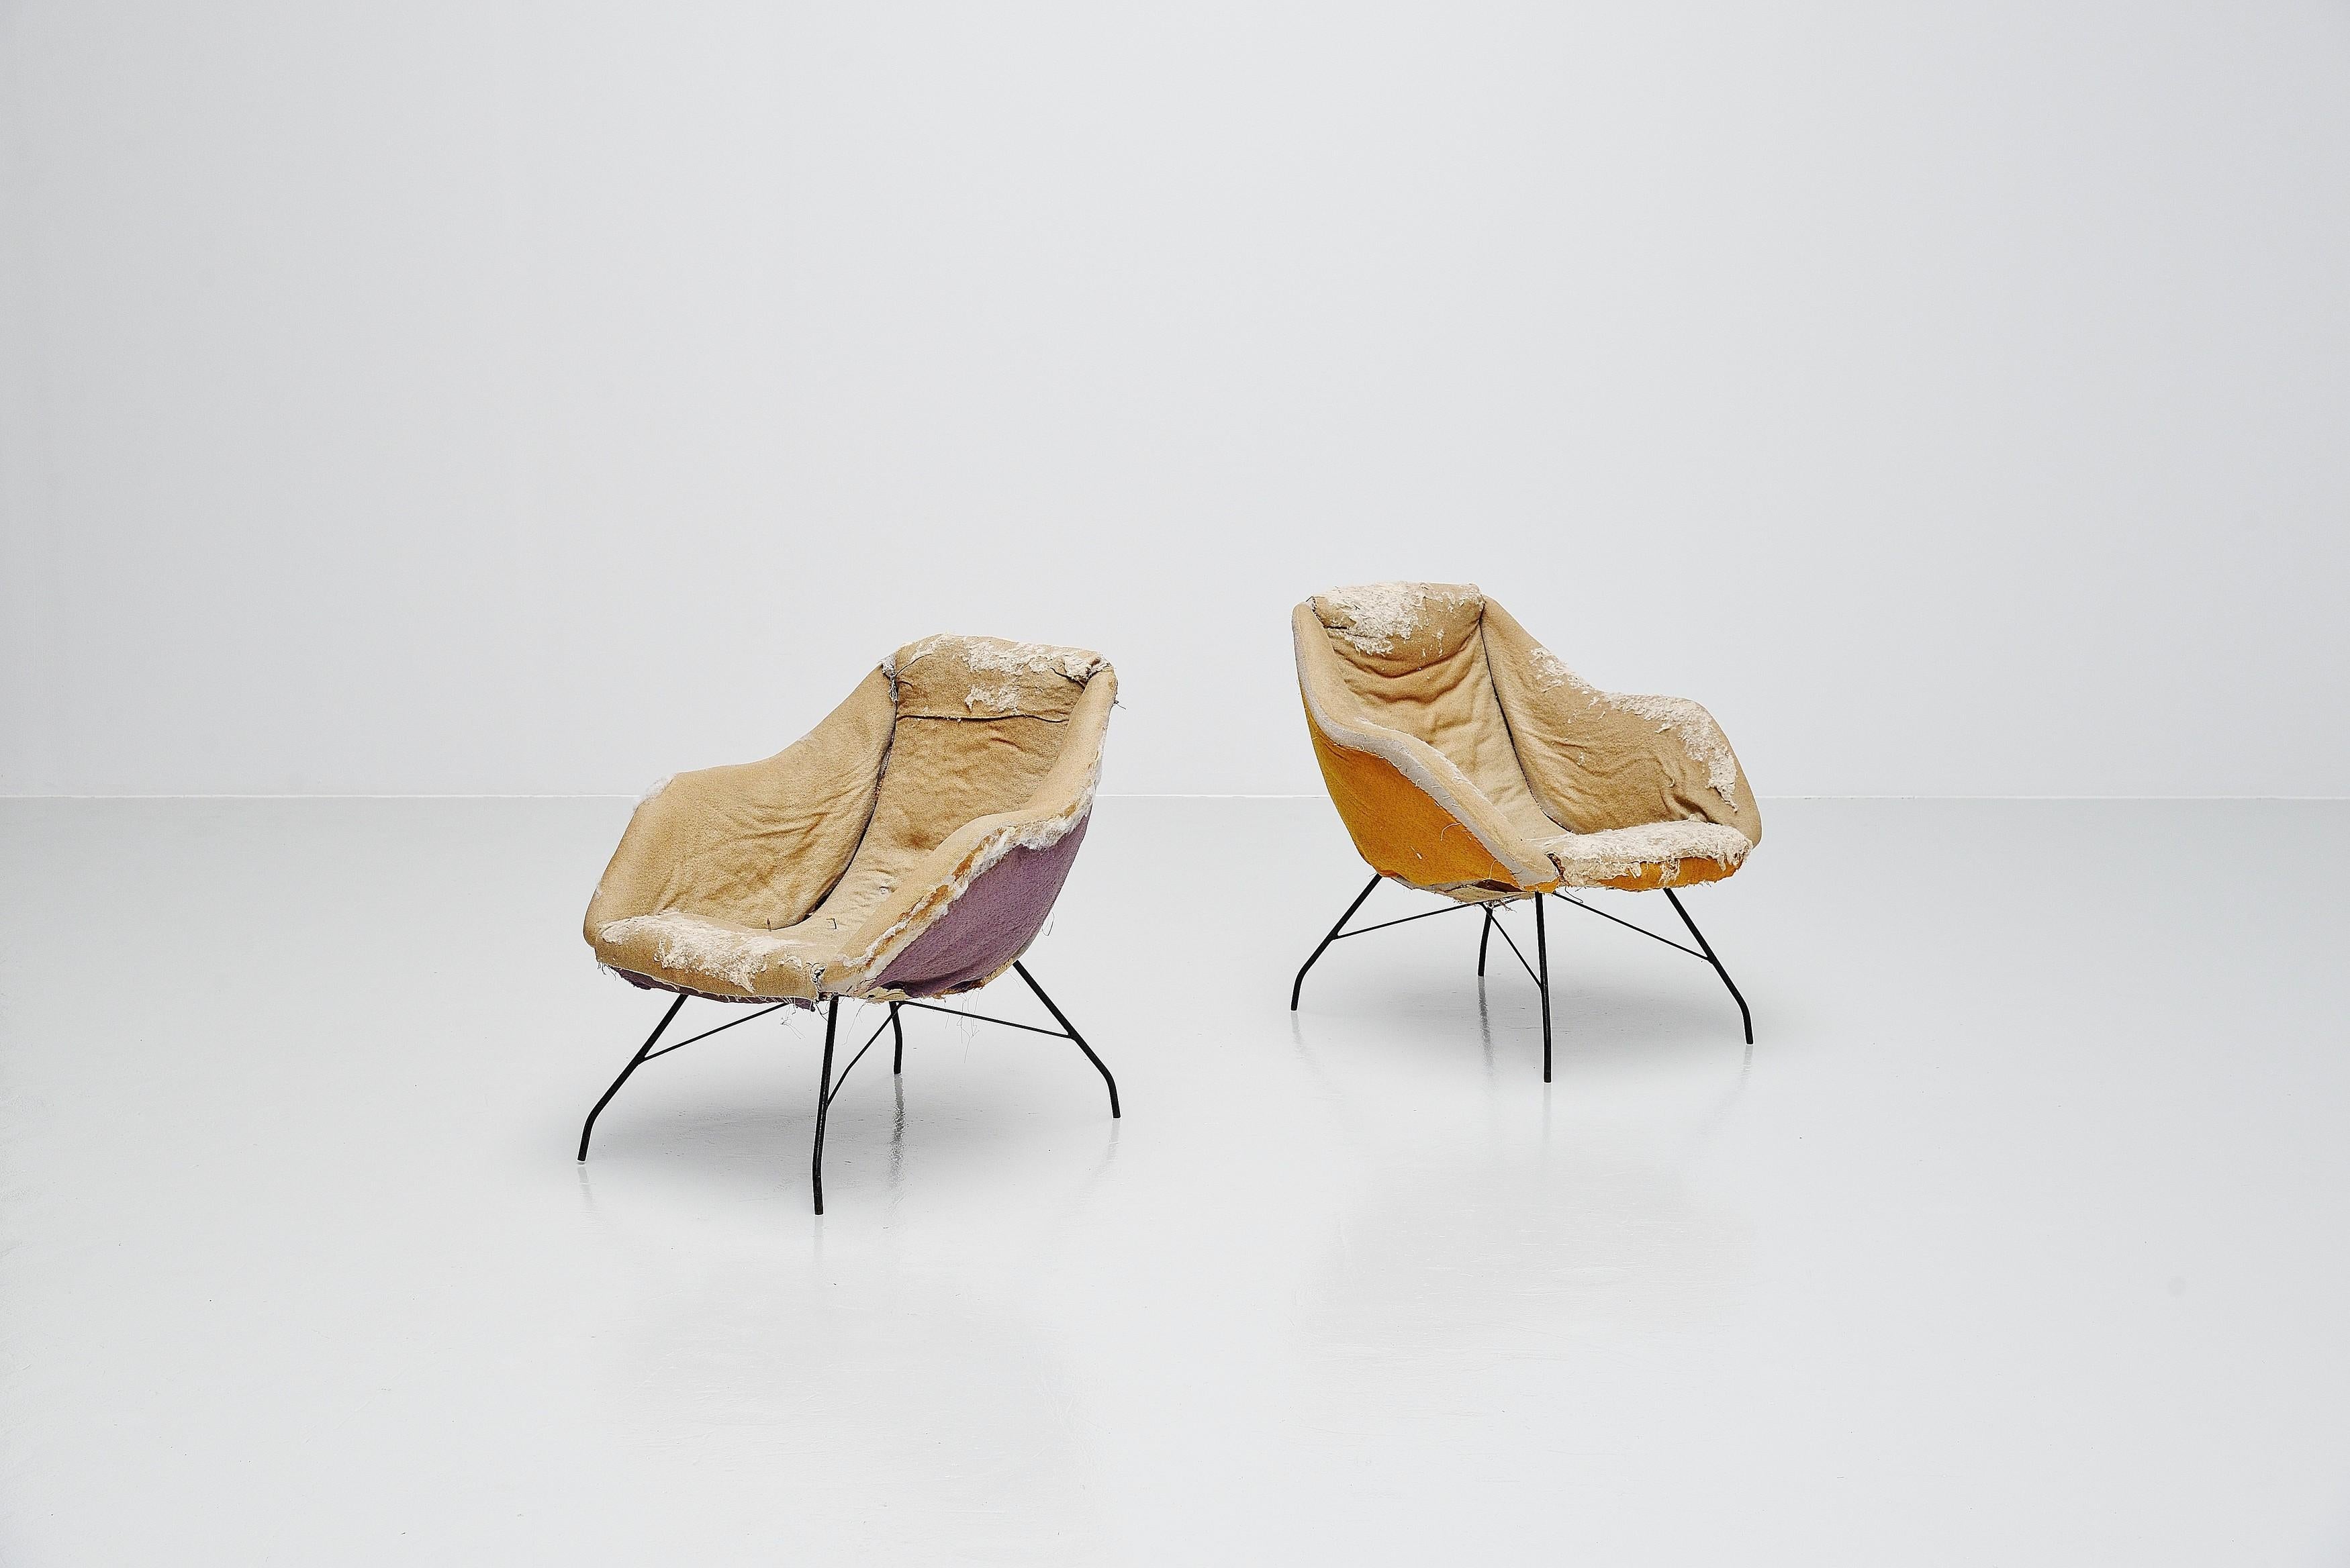 Stunning and fully original pair of 'Concha' (shell) lounge chairs designed by Carlo Hauner and Martin Eisler and manufactured by Forma Moveis, Brazil 1950. These chairs have a solid steel structure and upholstered shell seat. As you can see the